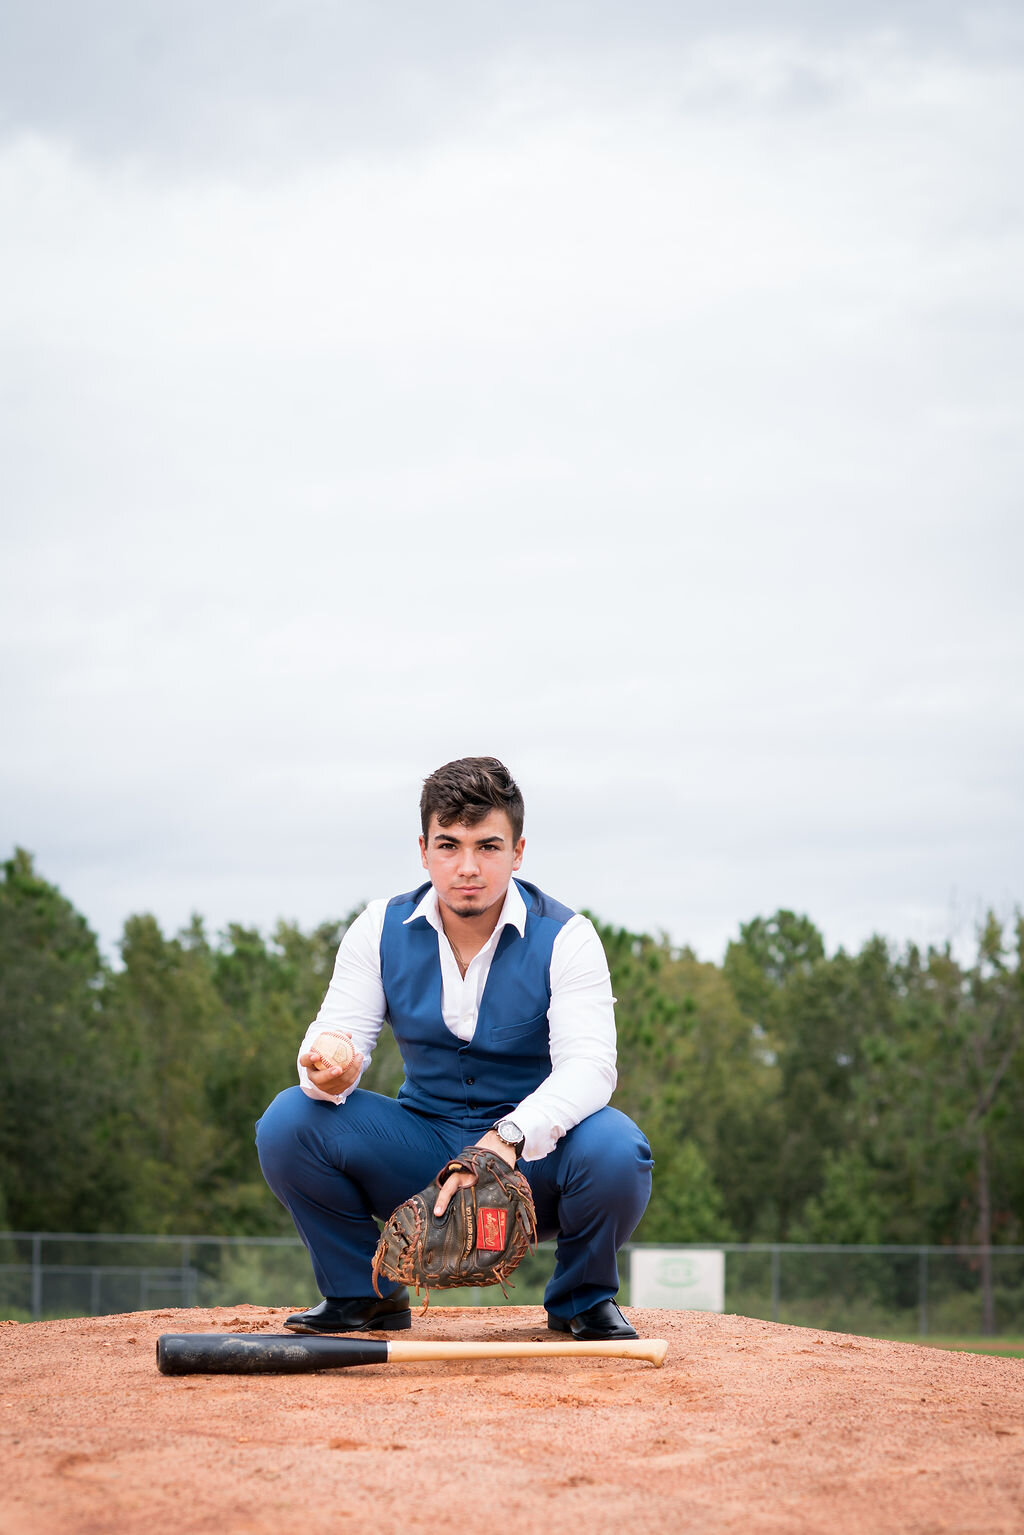 pitchers-mound, baseball-senior-pictures, batters-box-photos, batting-senior-photos, baseball-portrait-photography